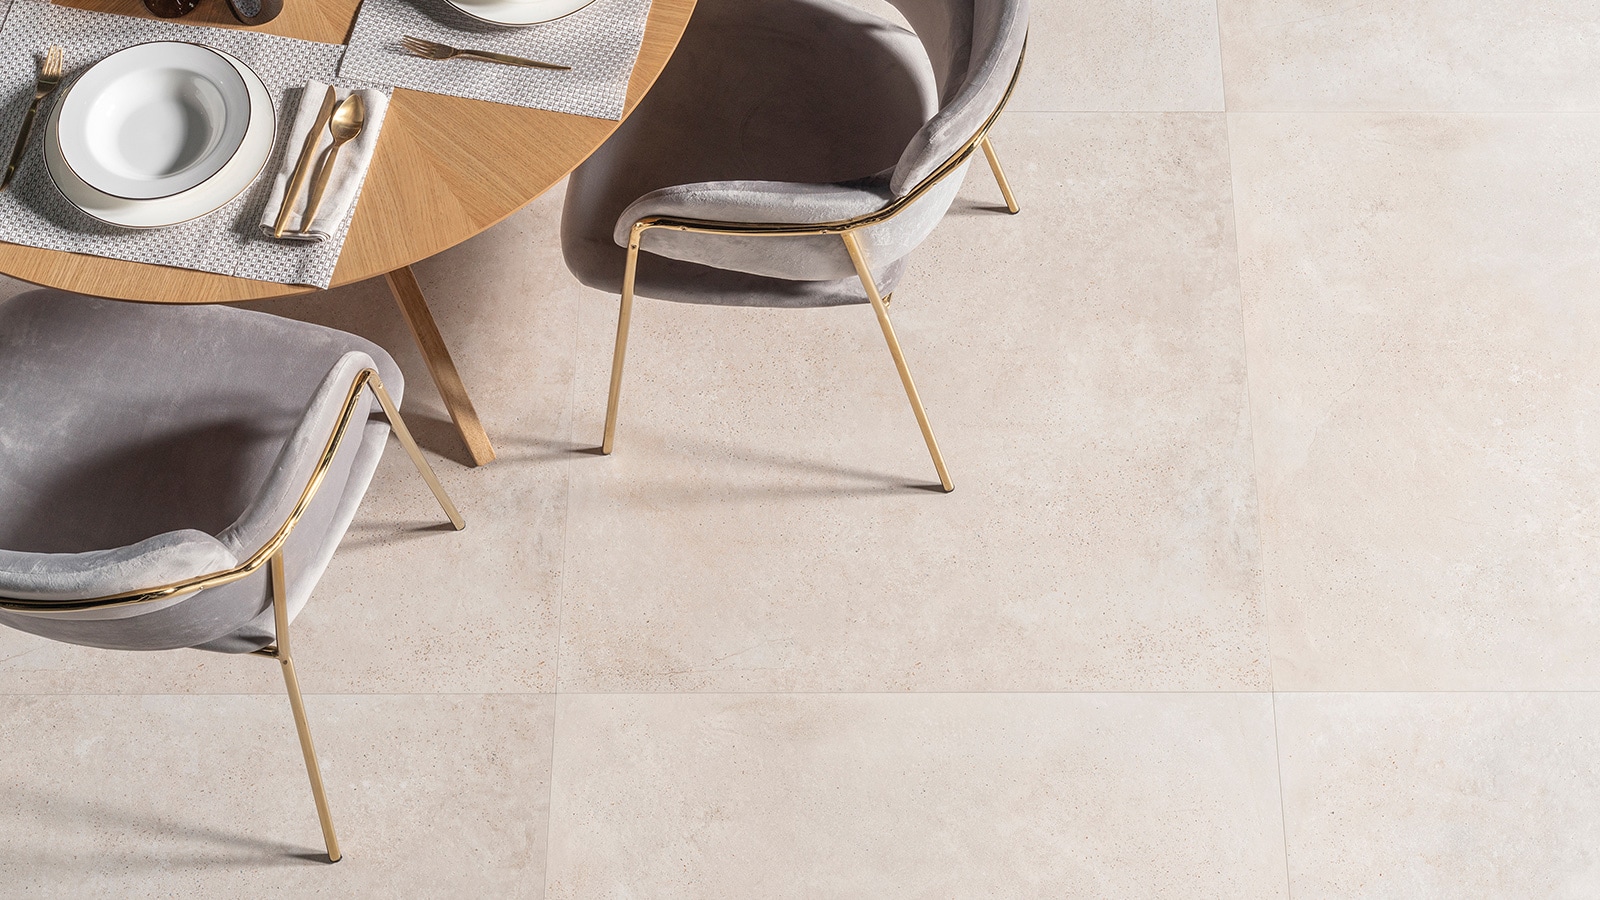 Placement joints as a decorative element on ceramic floor and wall tiles